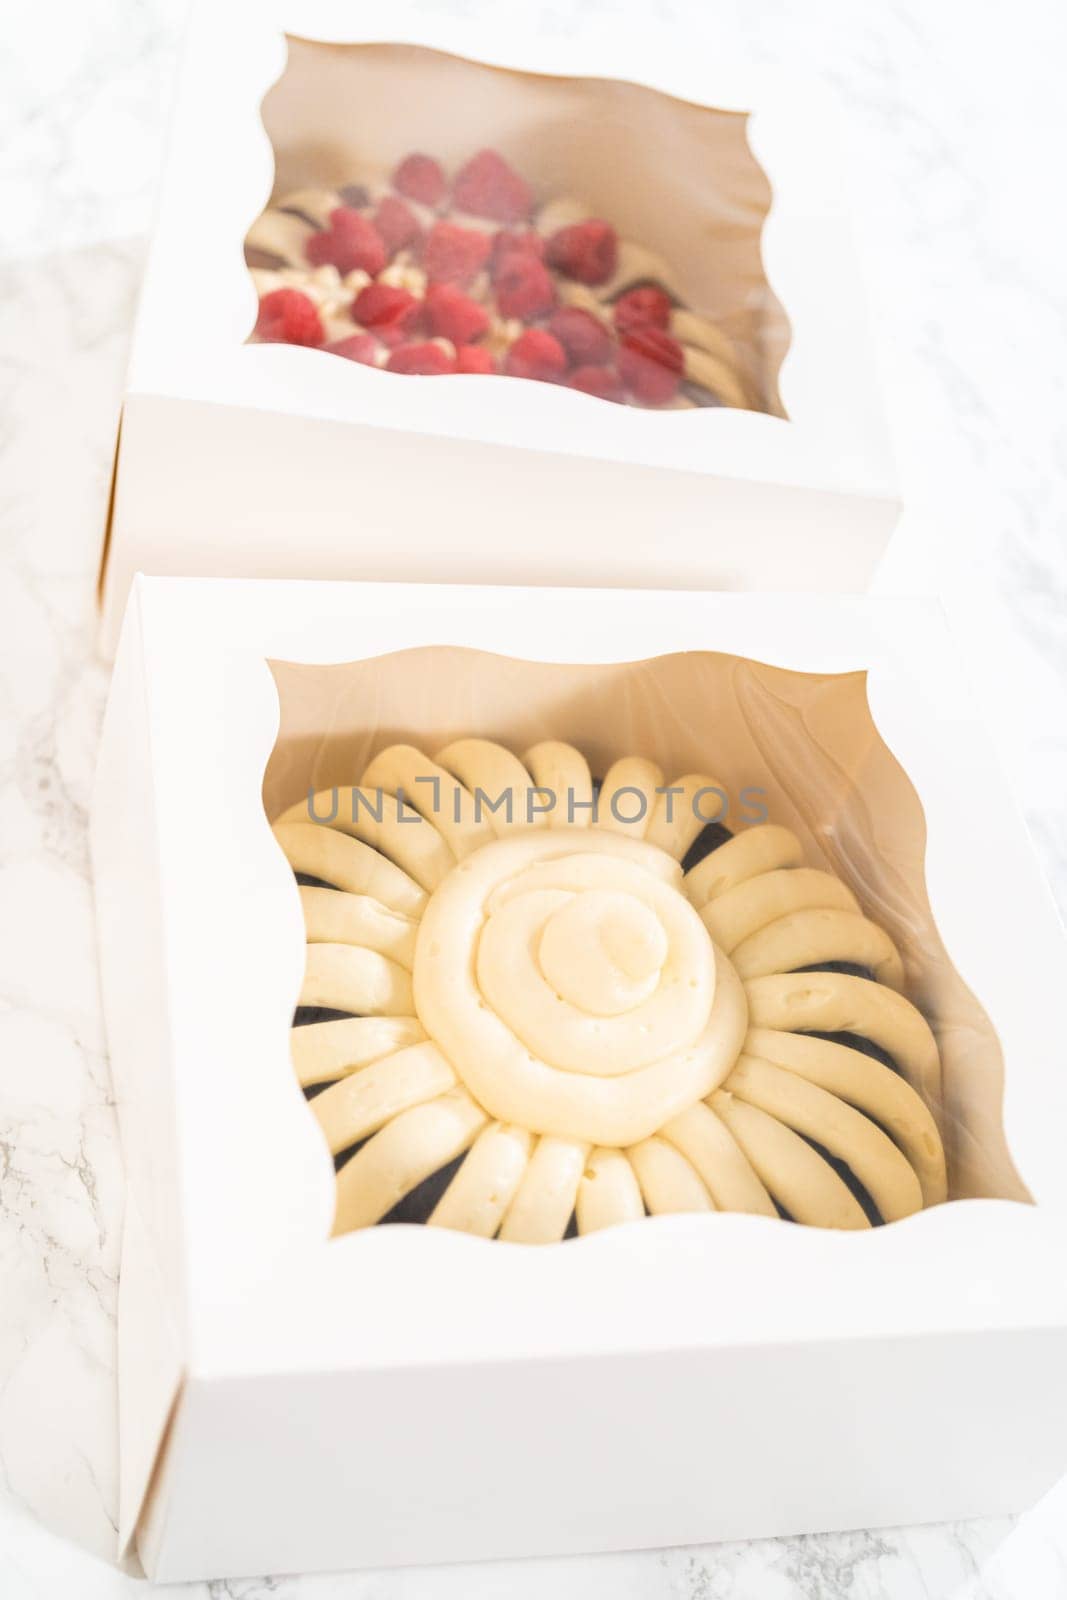 Two delightful homemade bundt cakes, each adorned with creamy cream cheese frosting, elegantly packaged in white paper boxes with a clear window to showcase their scrumptious appeal.